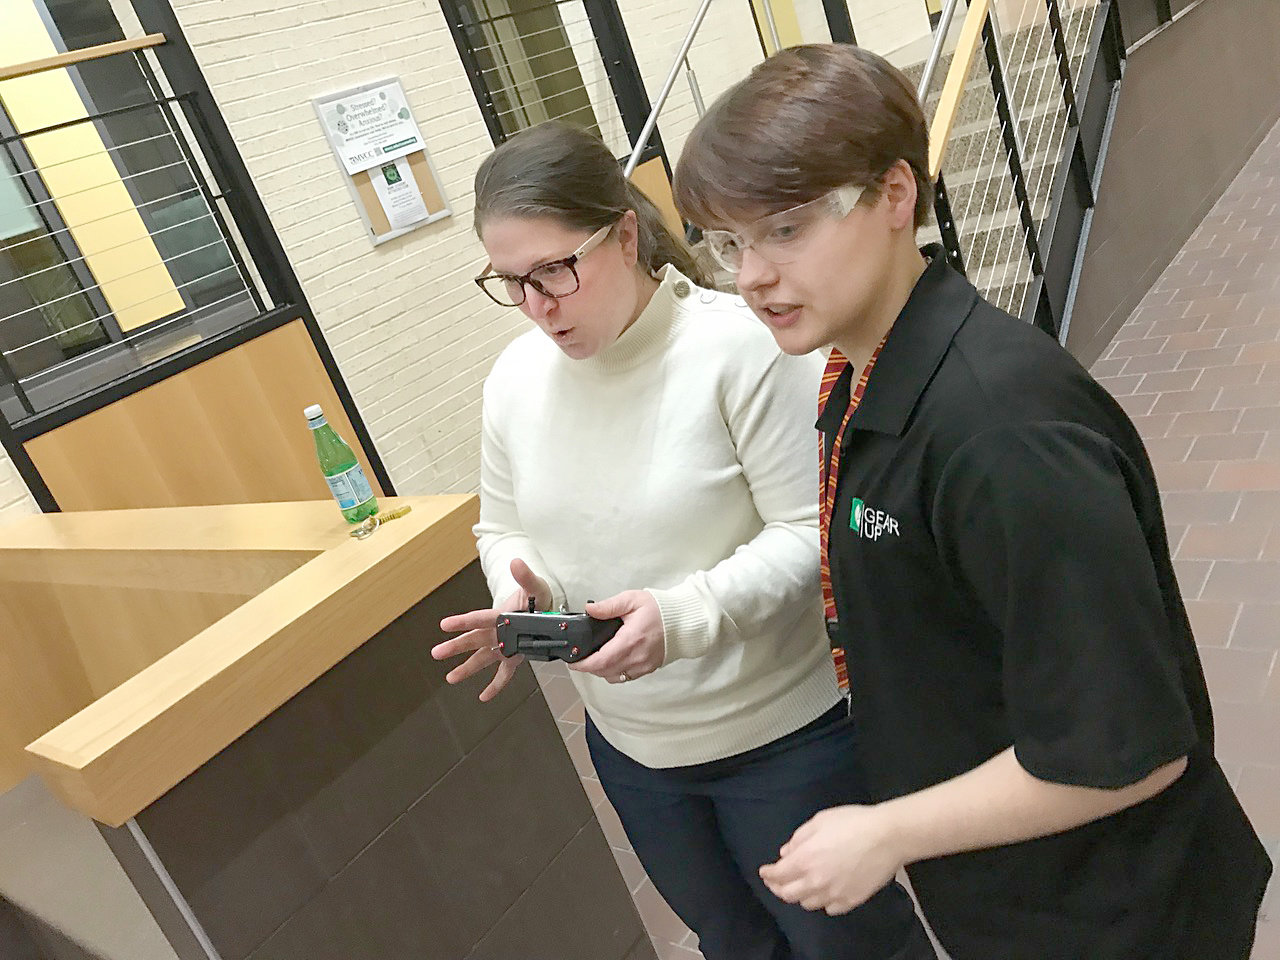 Rome Free Academy junior and Drone Soccer Club competitor Olivia Tyler, right, teaches Rome City School District Board of Education member Cassie Knutti how to play soccer with flying drones Monday, Feb. 13 on Mohawk Valley Community College's Rome campus.